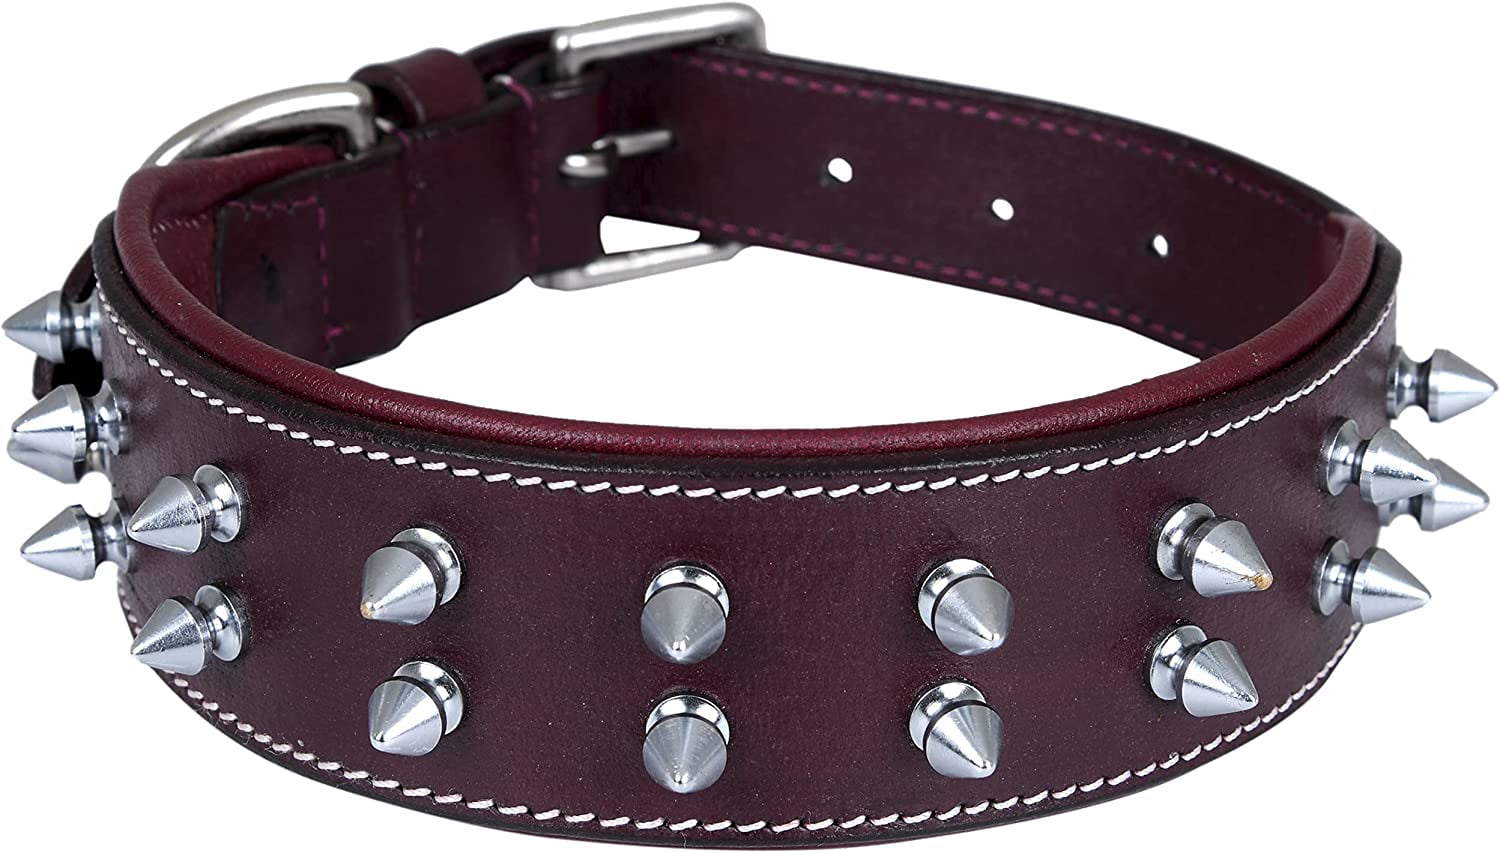 Get Walking Leather Cane Corso Collar, Spiked, Studded